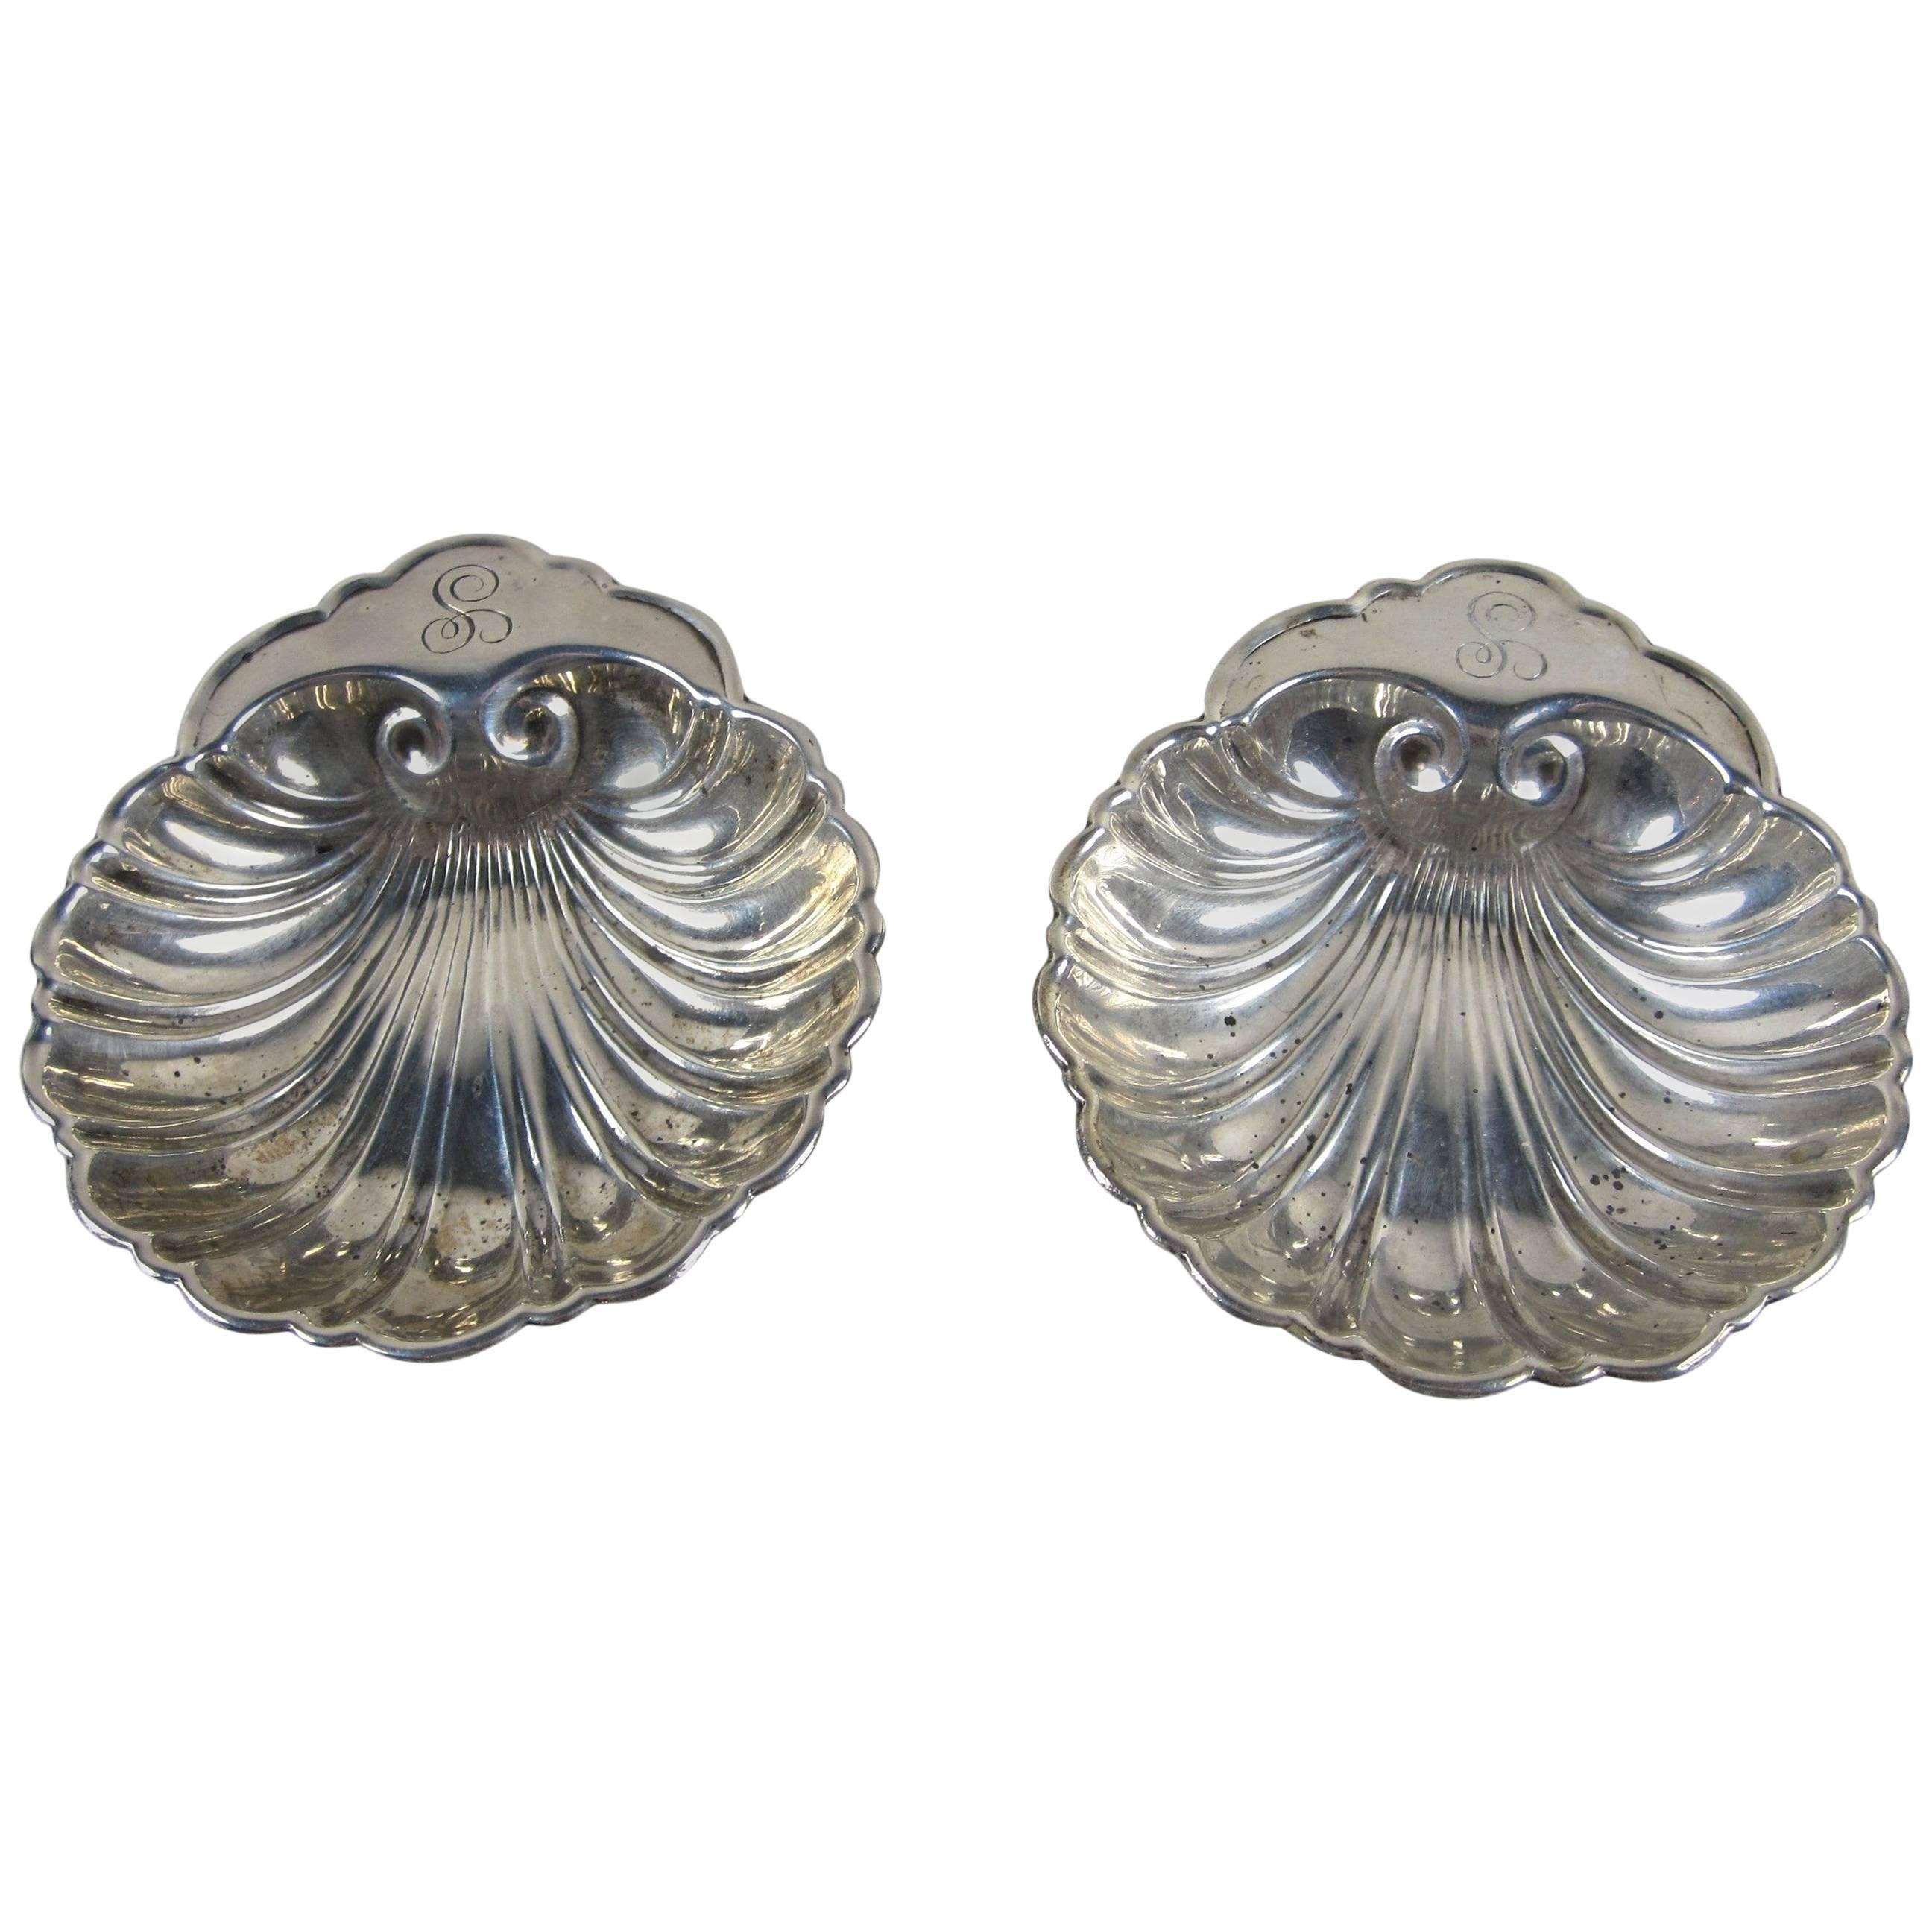 Sterling Silver Shell Shaped Vida-Poche, Coin Dishes, a Pair